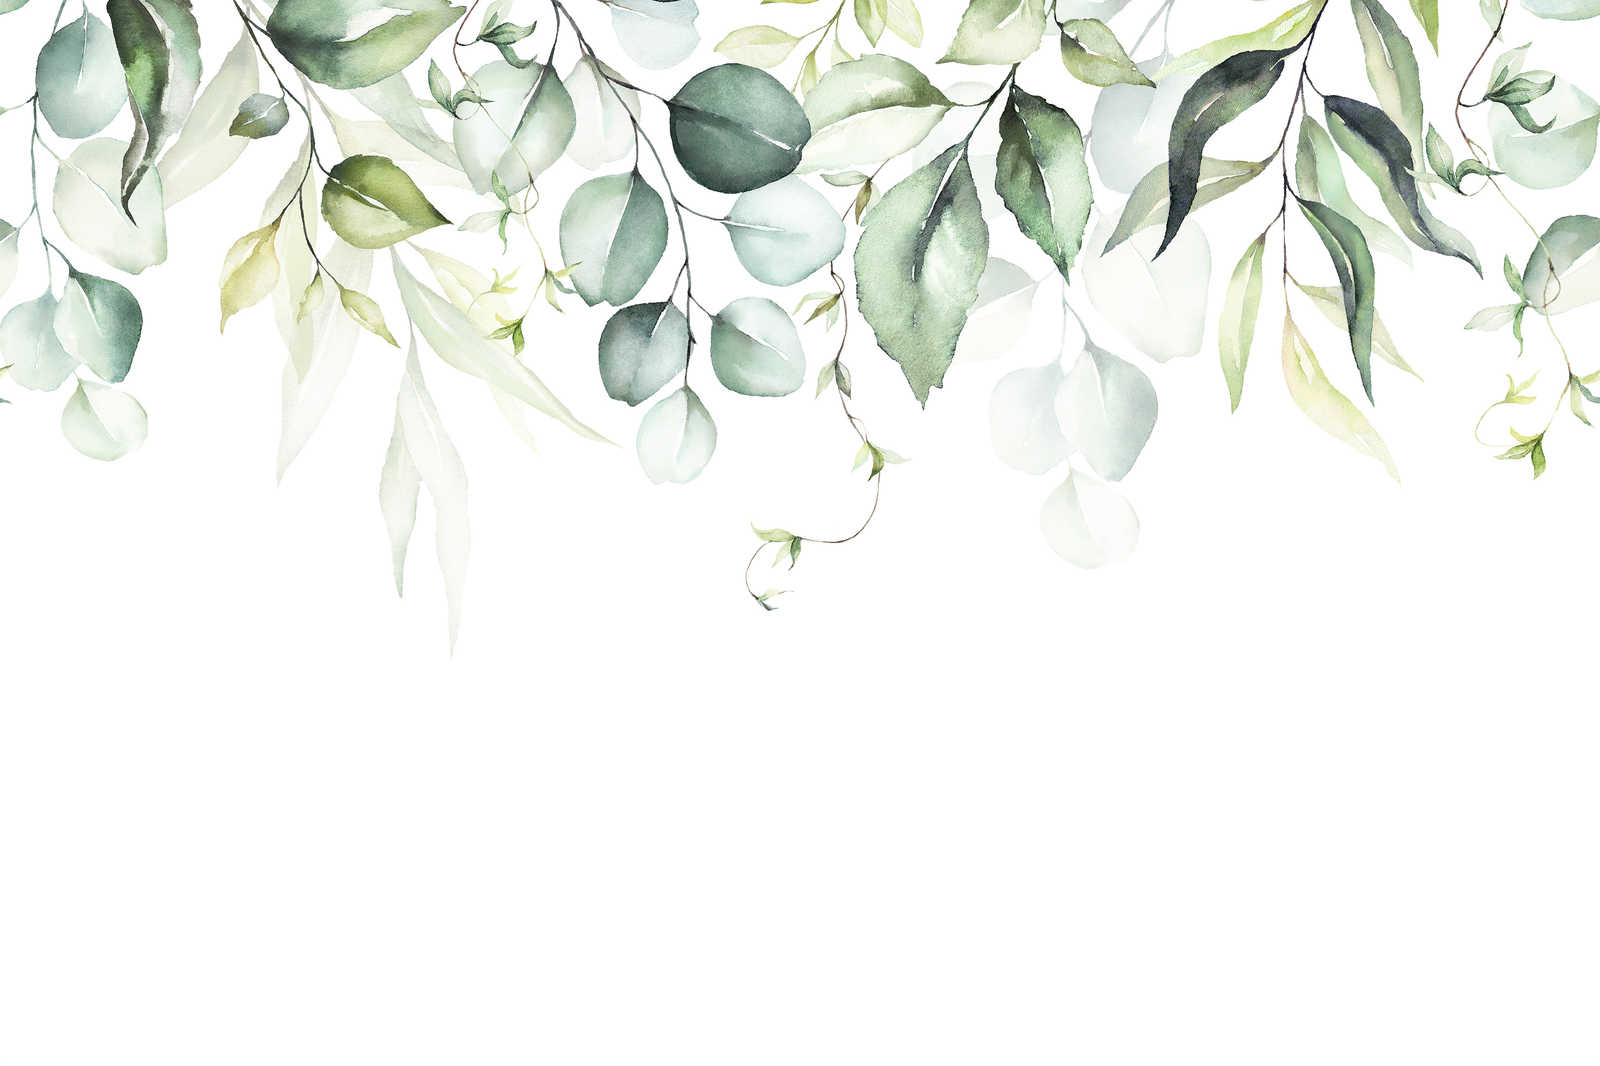             Canvas painting with leaf tendrils in watercolour look - 0.90 m x 0.60 m
        